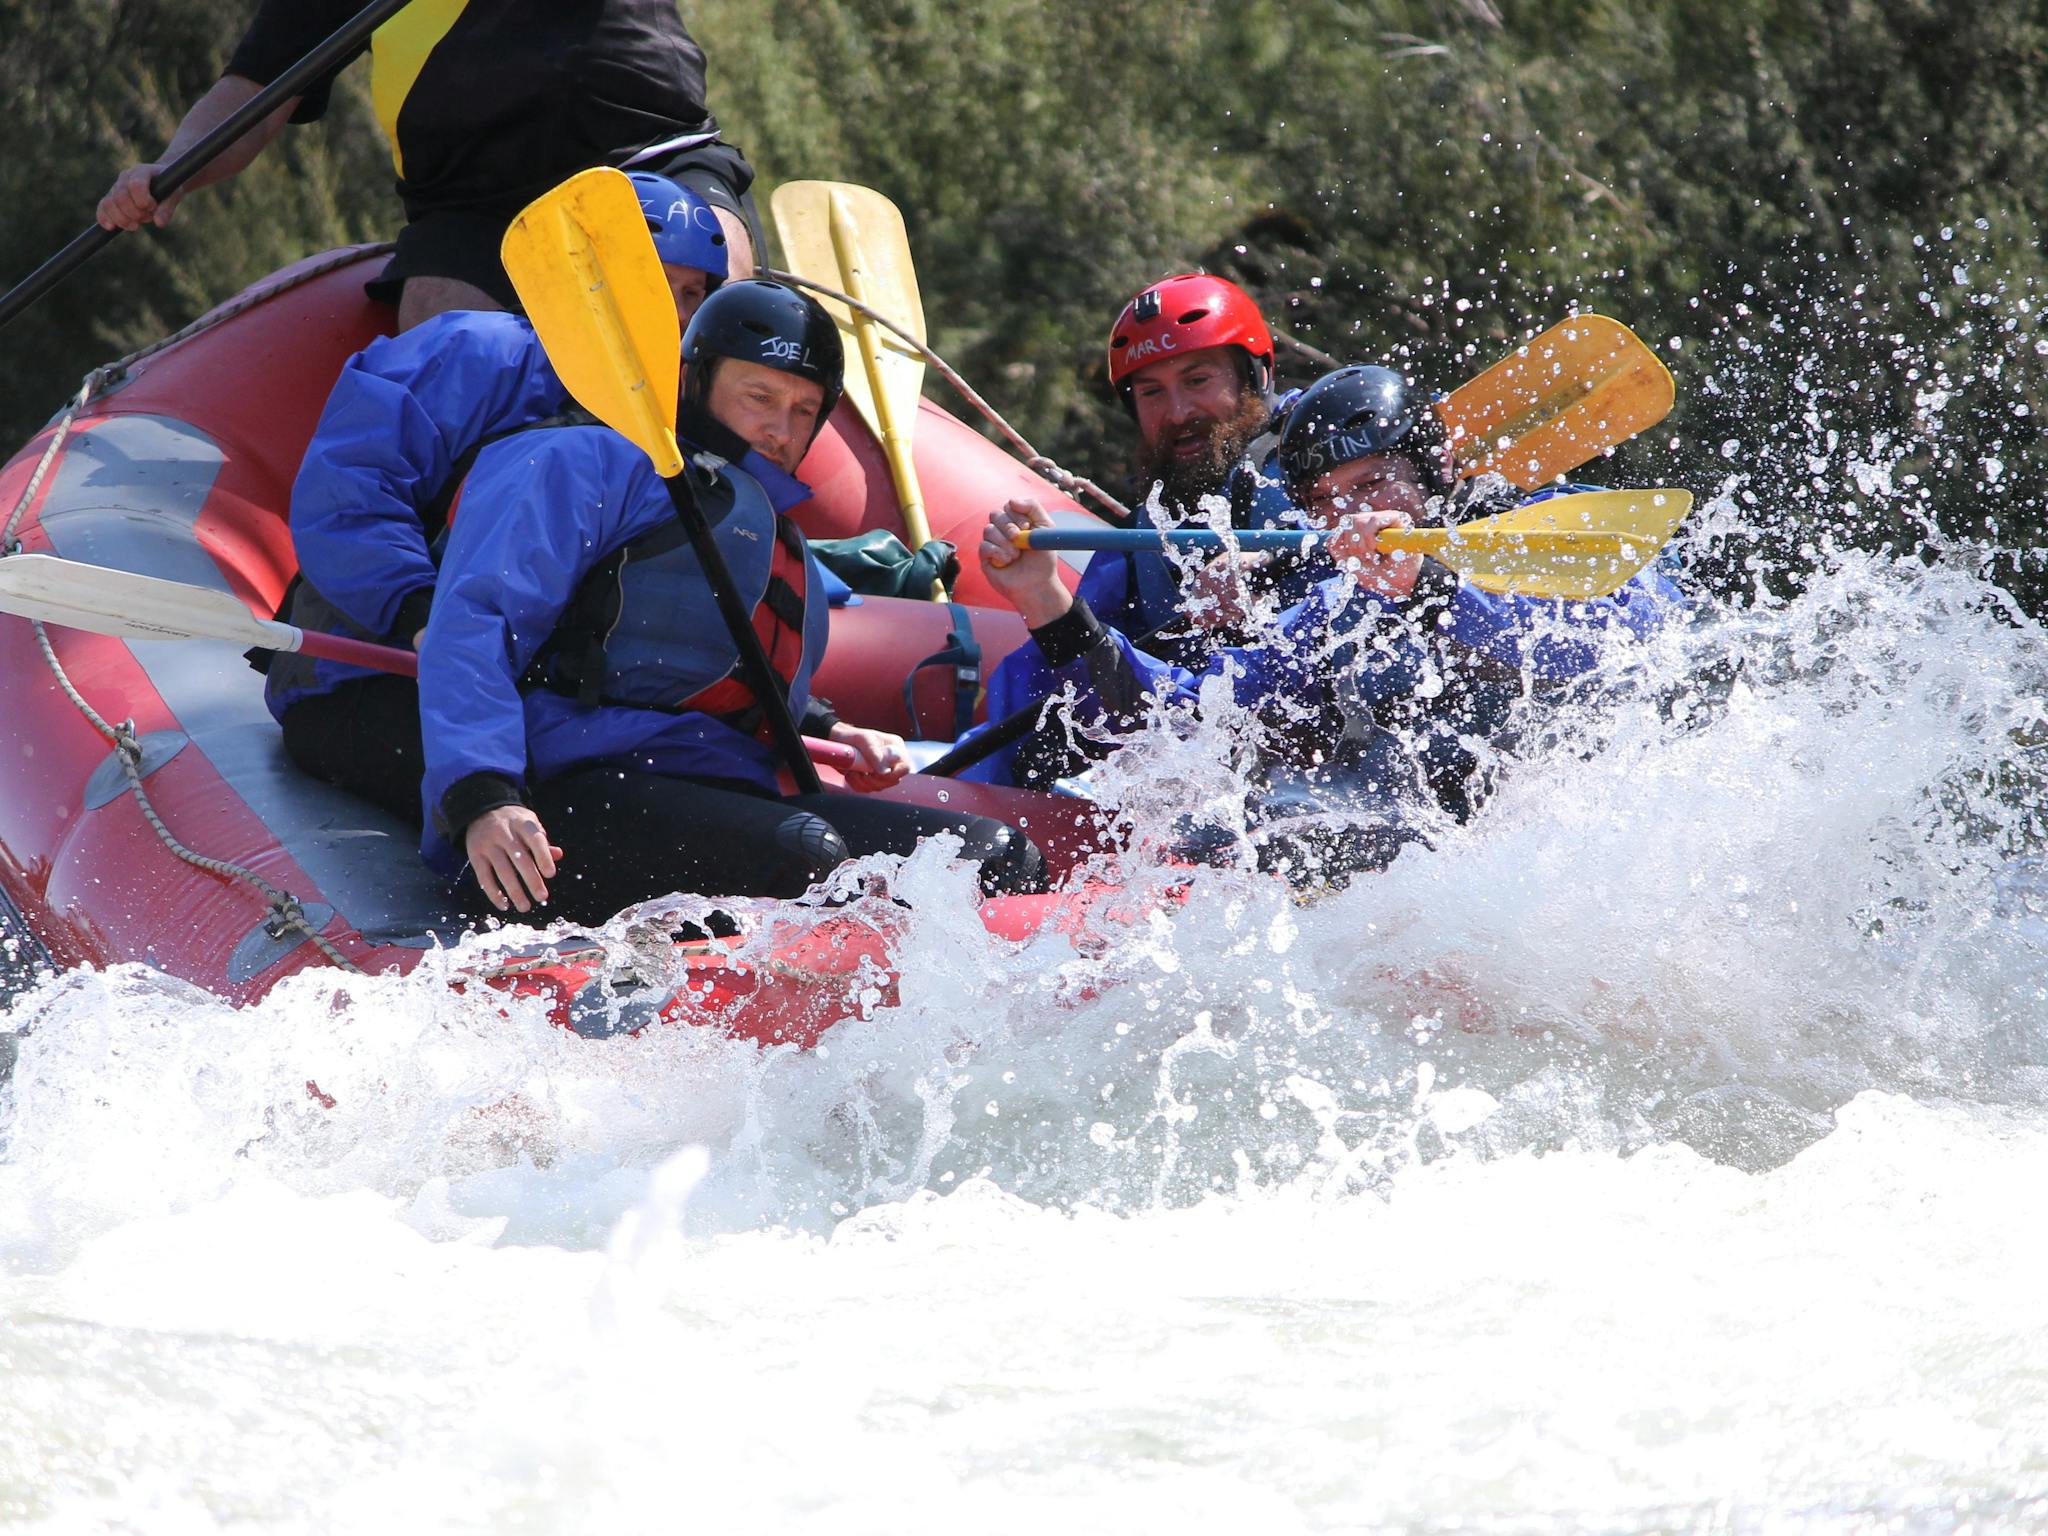 Grand final weekend white water rafting the Mitta river